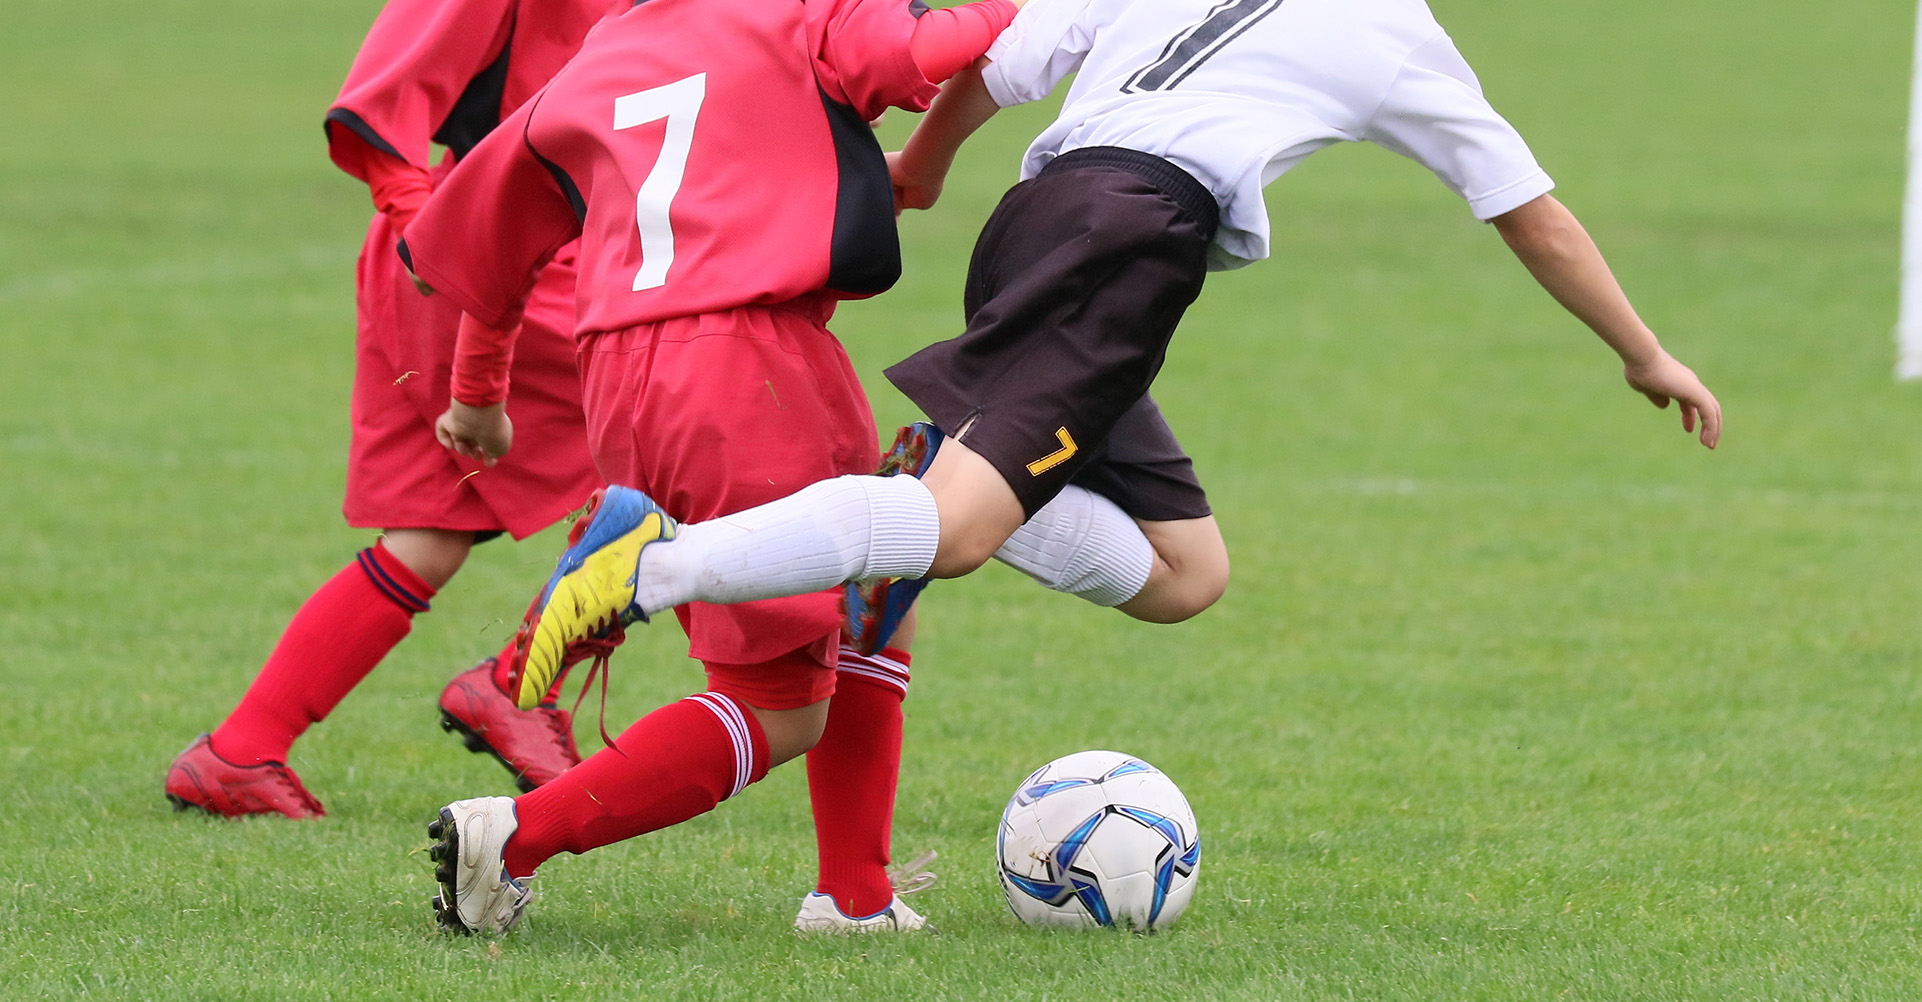 Sporting Accidents, Tackles, Sport Injuries, Compensation